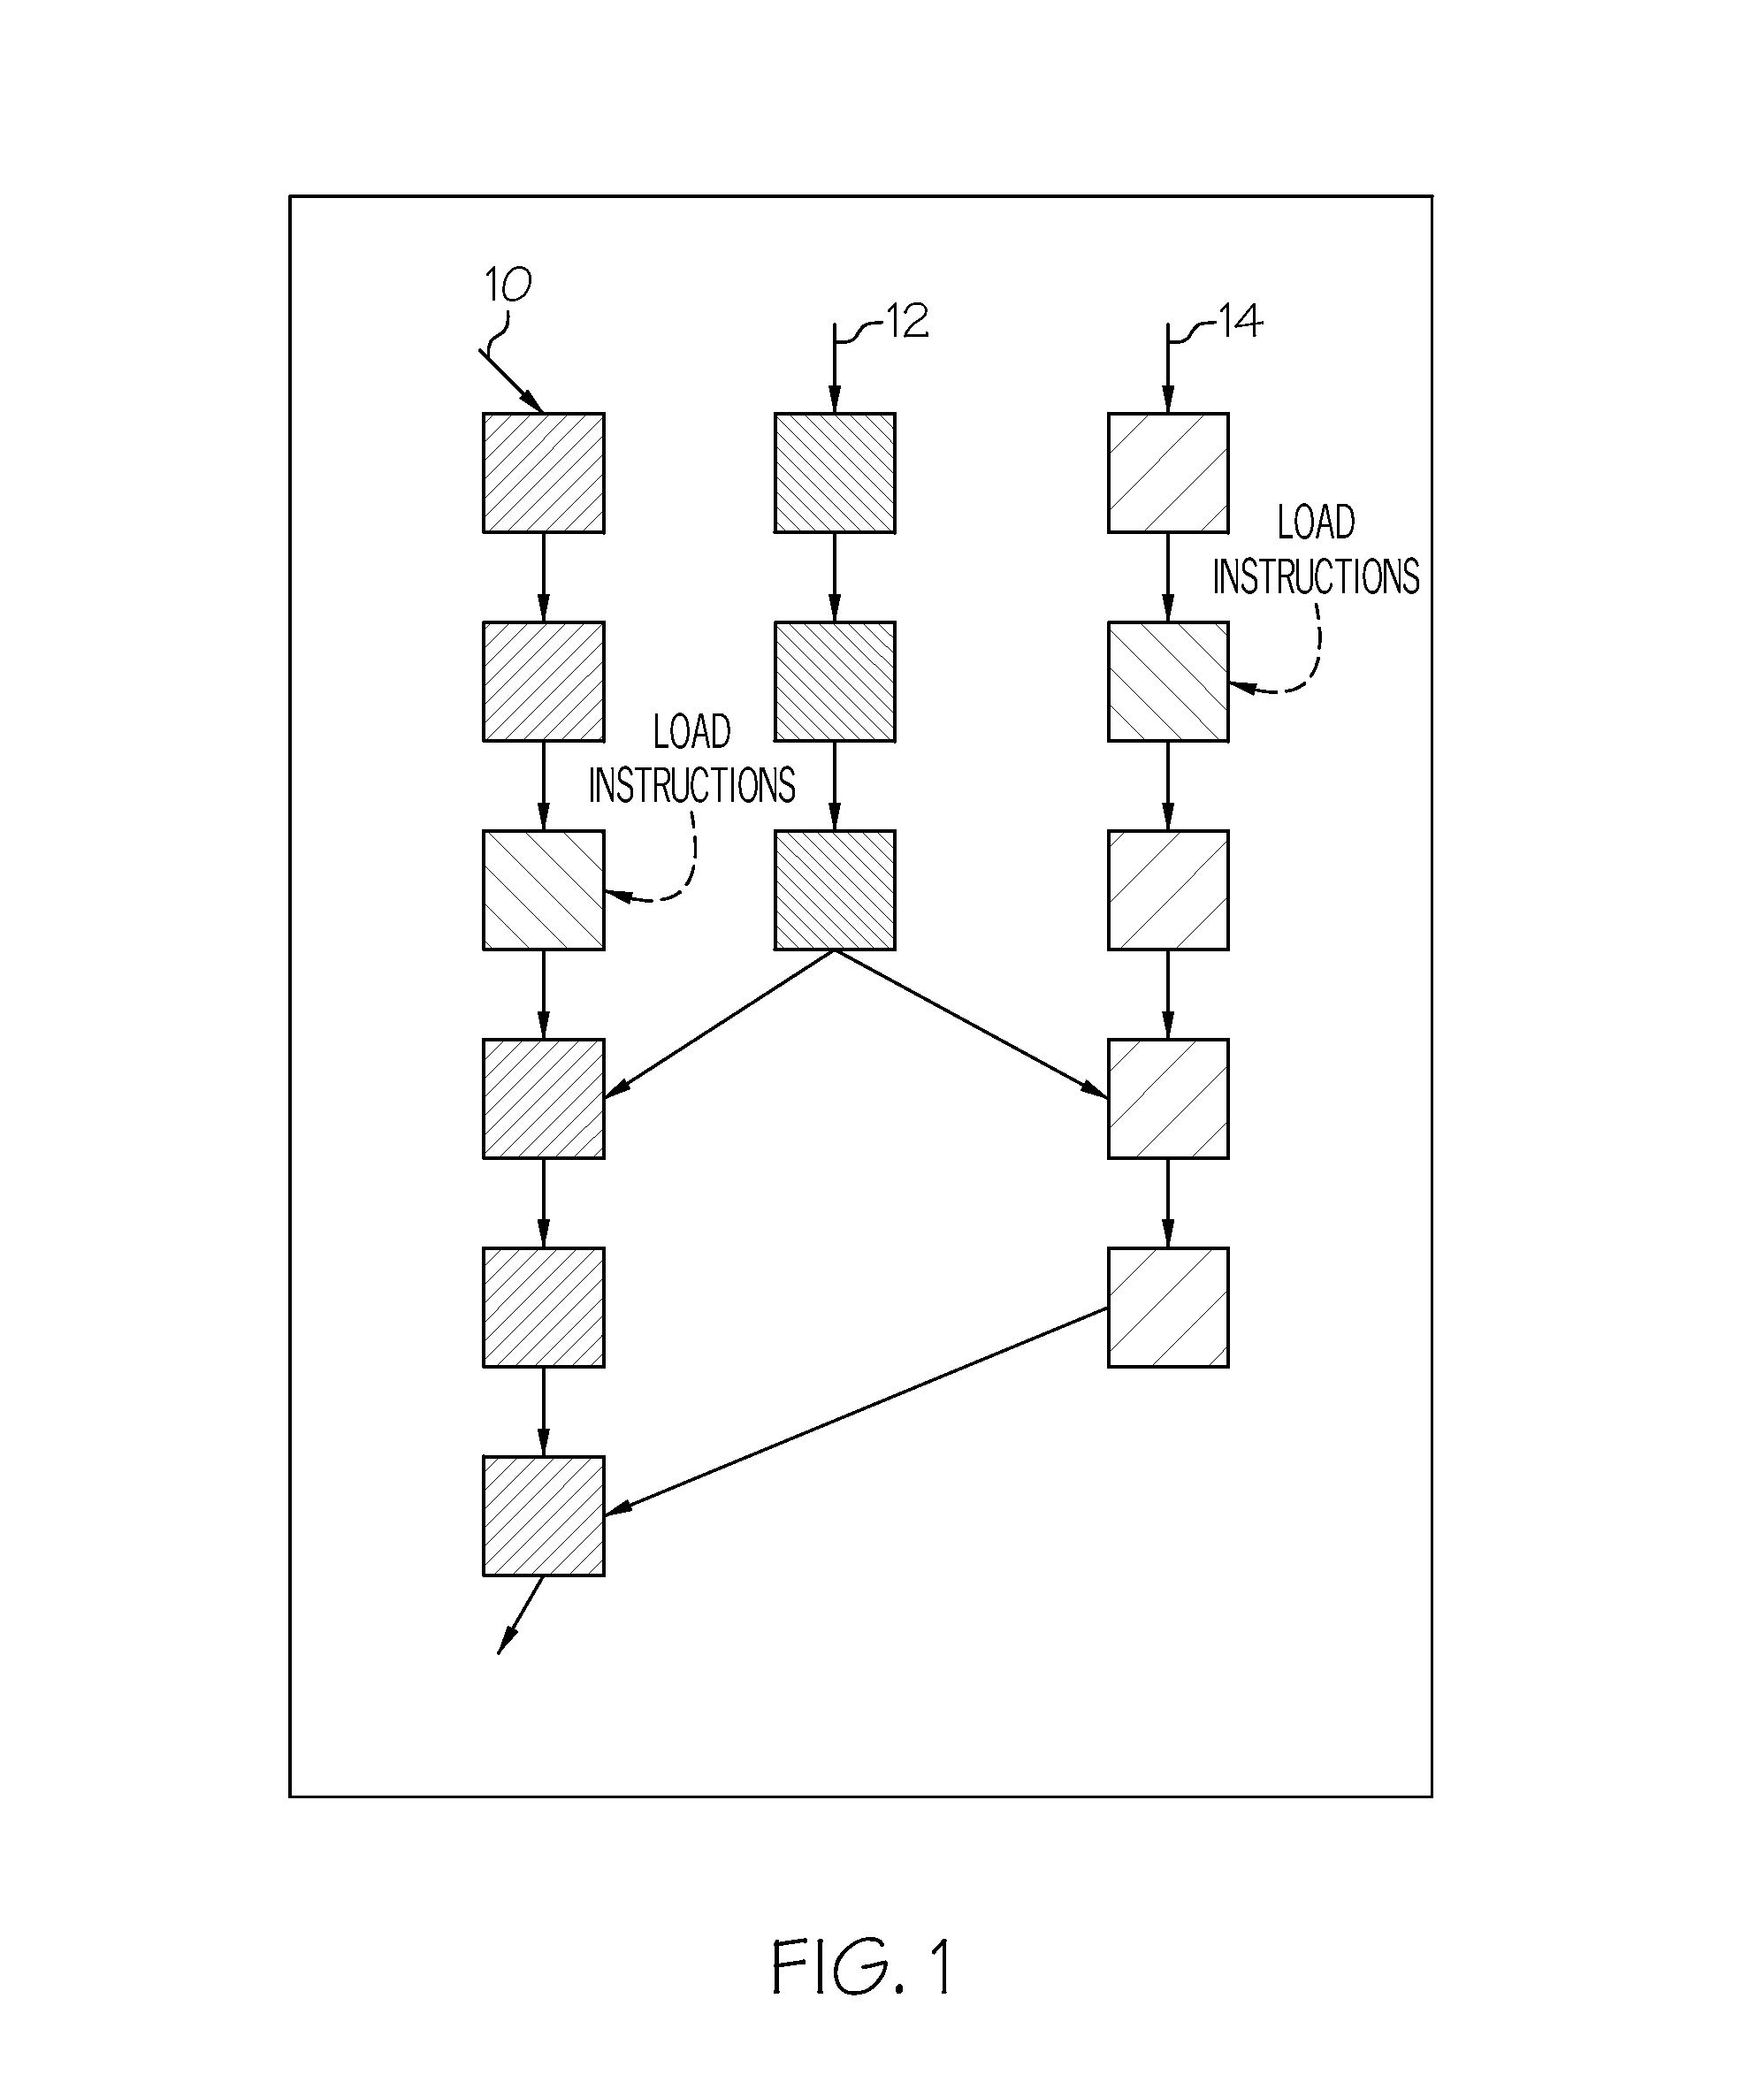 Computer processing system employing an instruction reorder buffer